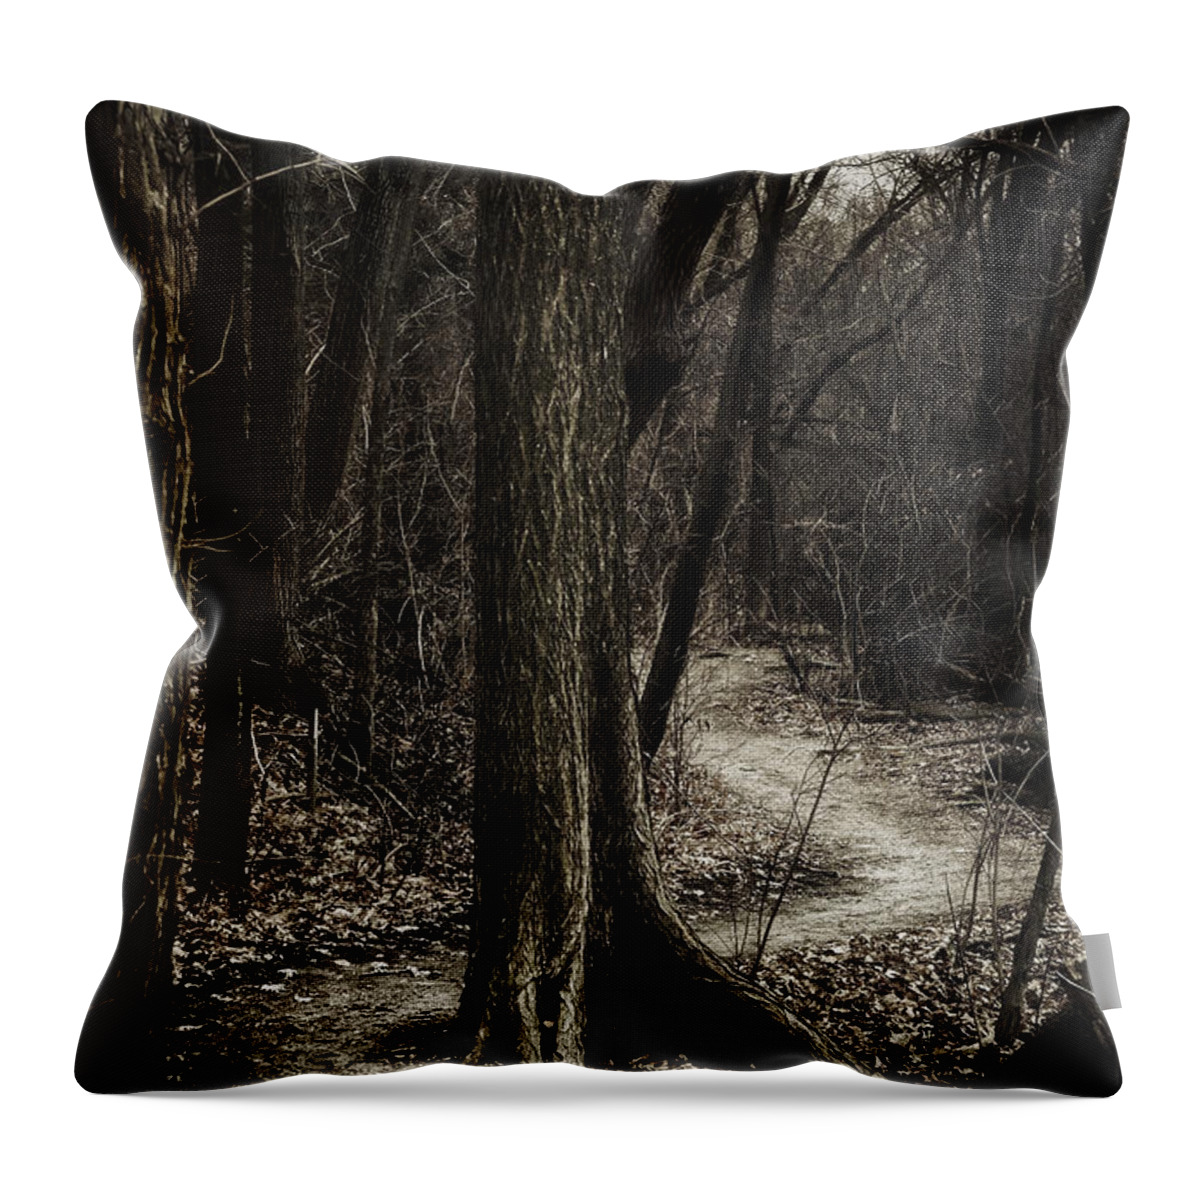 Path Throw Pillow featuring the photograph Dark Winding Path by Scott Norris